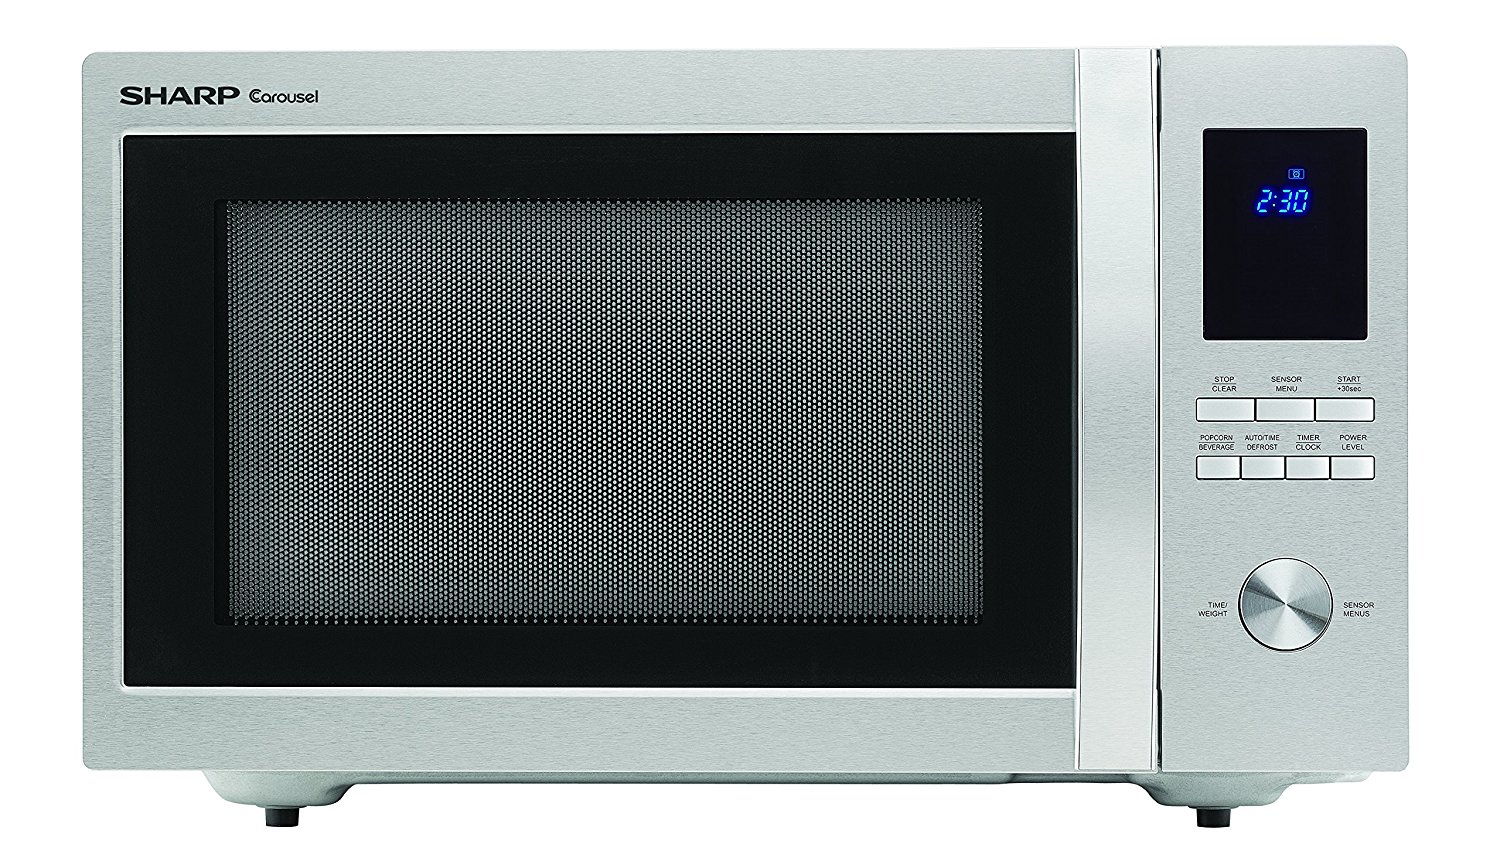 Sharp Microwaves ZSMC1655BS Sharp 1,100W Countertop Microwave Oven, 1.6 Cubic Foot, Stainless Steel